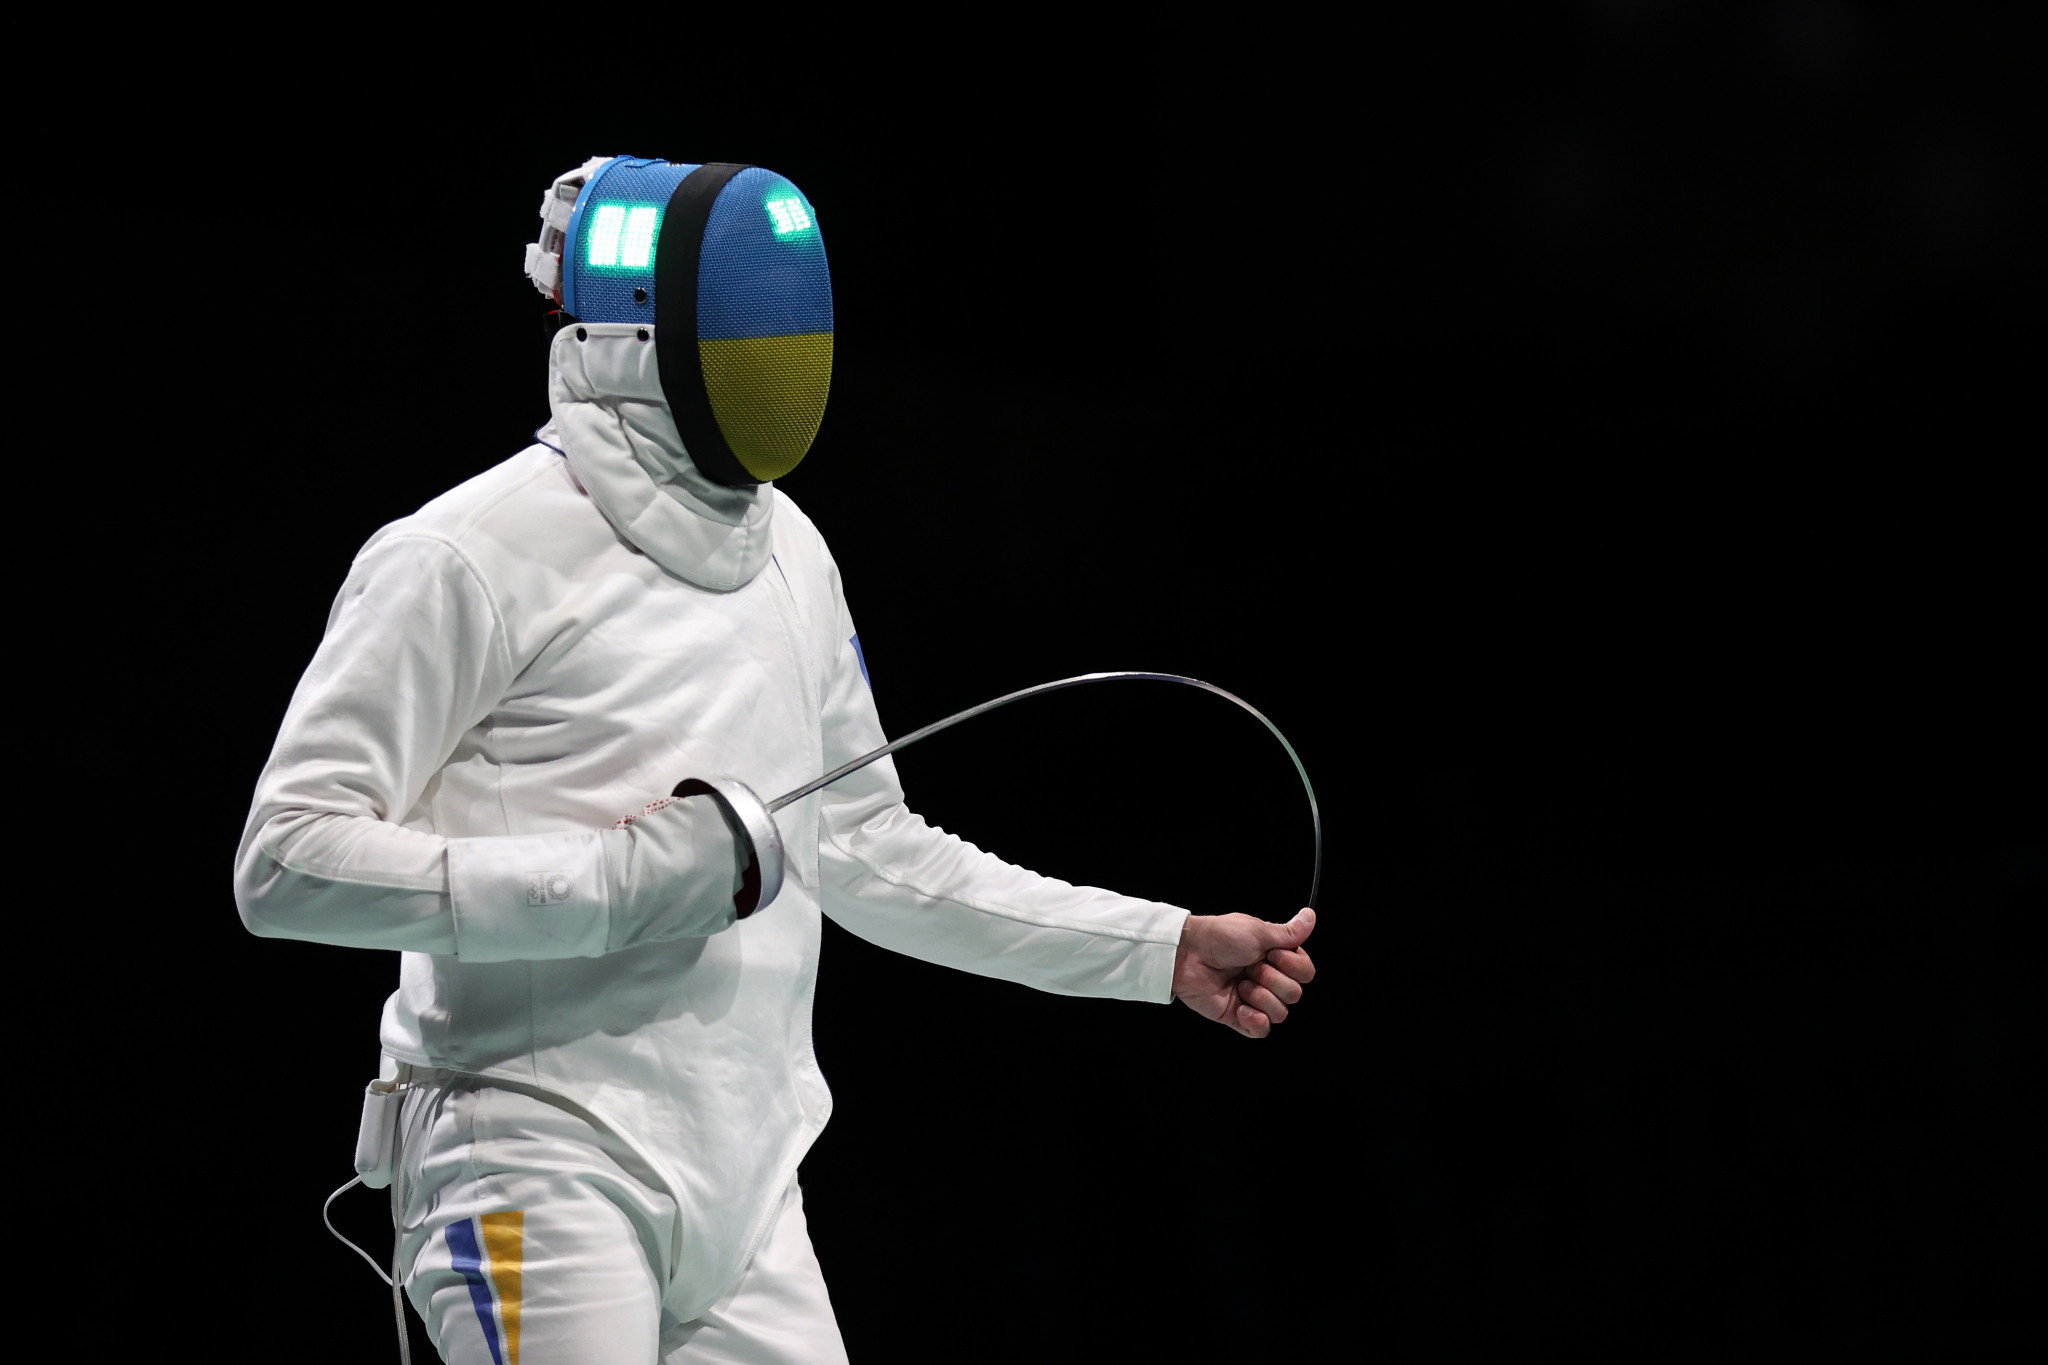 The Ukrainian Fencing Federation has sent a letter to the heads of National Federations calling on them to vote against the return of Russian and Belarusian fencers ©Getty Images